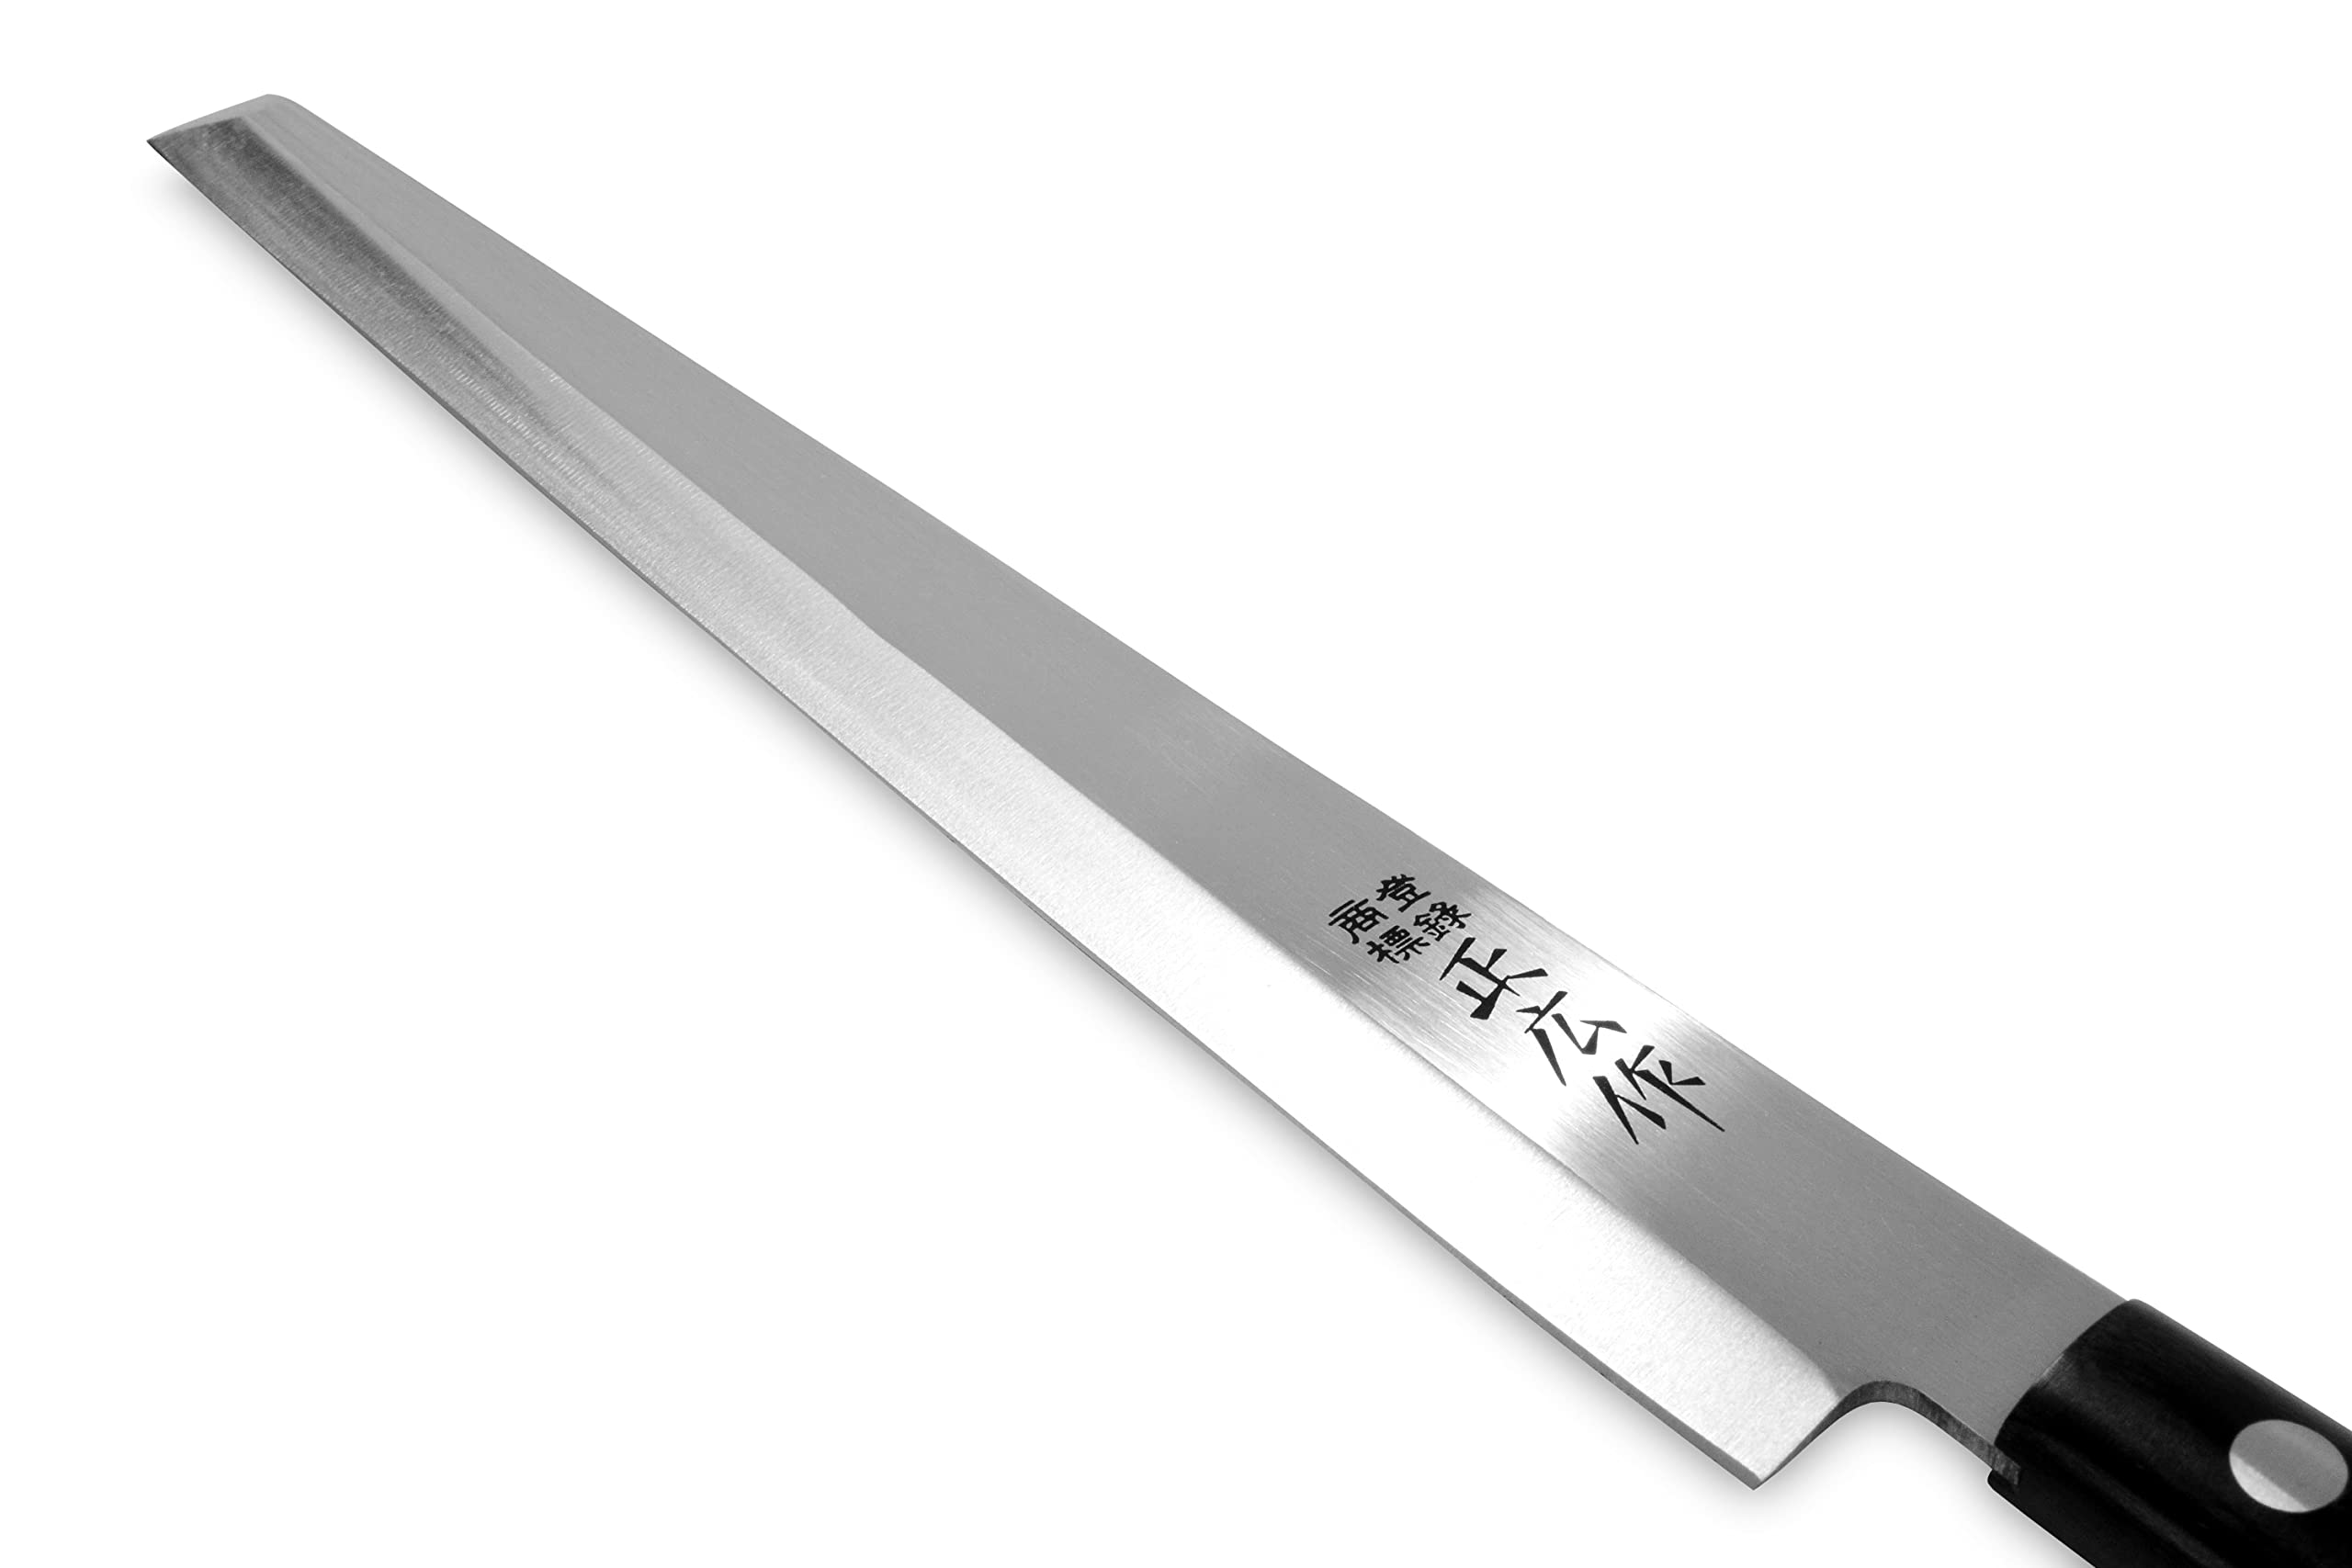 Seki Japan Masahiro Japanese Professional Sushi Sashimi Knife for Left Handed, Fish Filleting & Slicing, 240 mm (9.4 inch), Japanese Stainless Steel Kitchen Cutlery, Chef Knives with Wood Handle